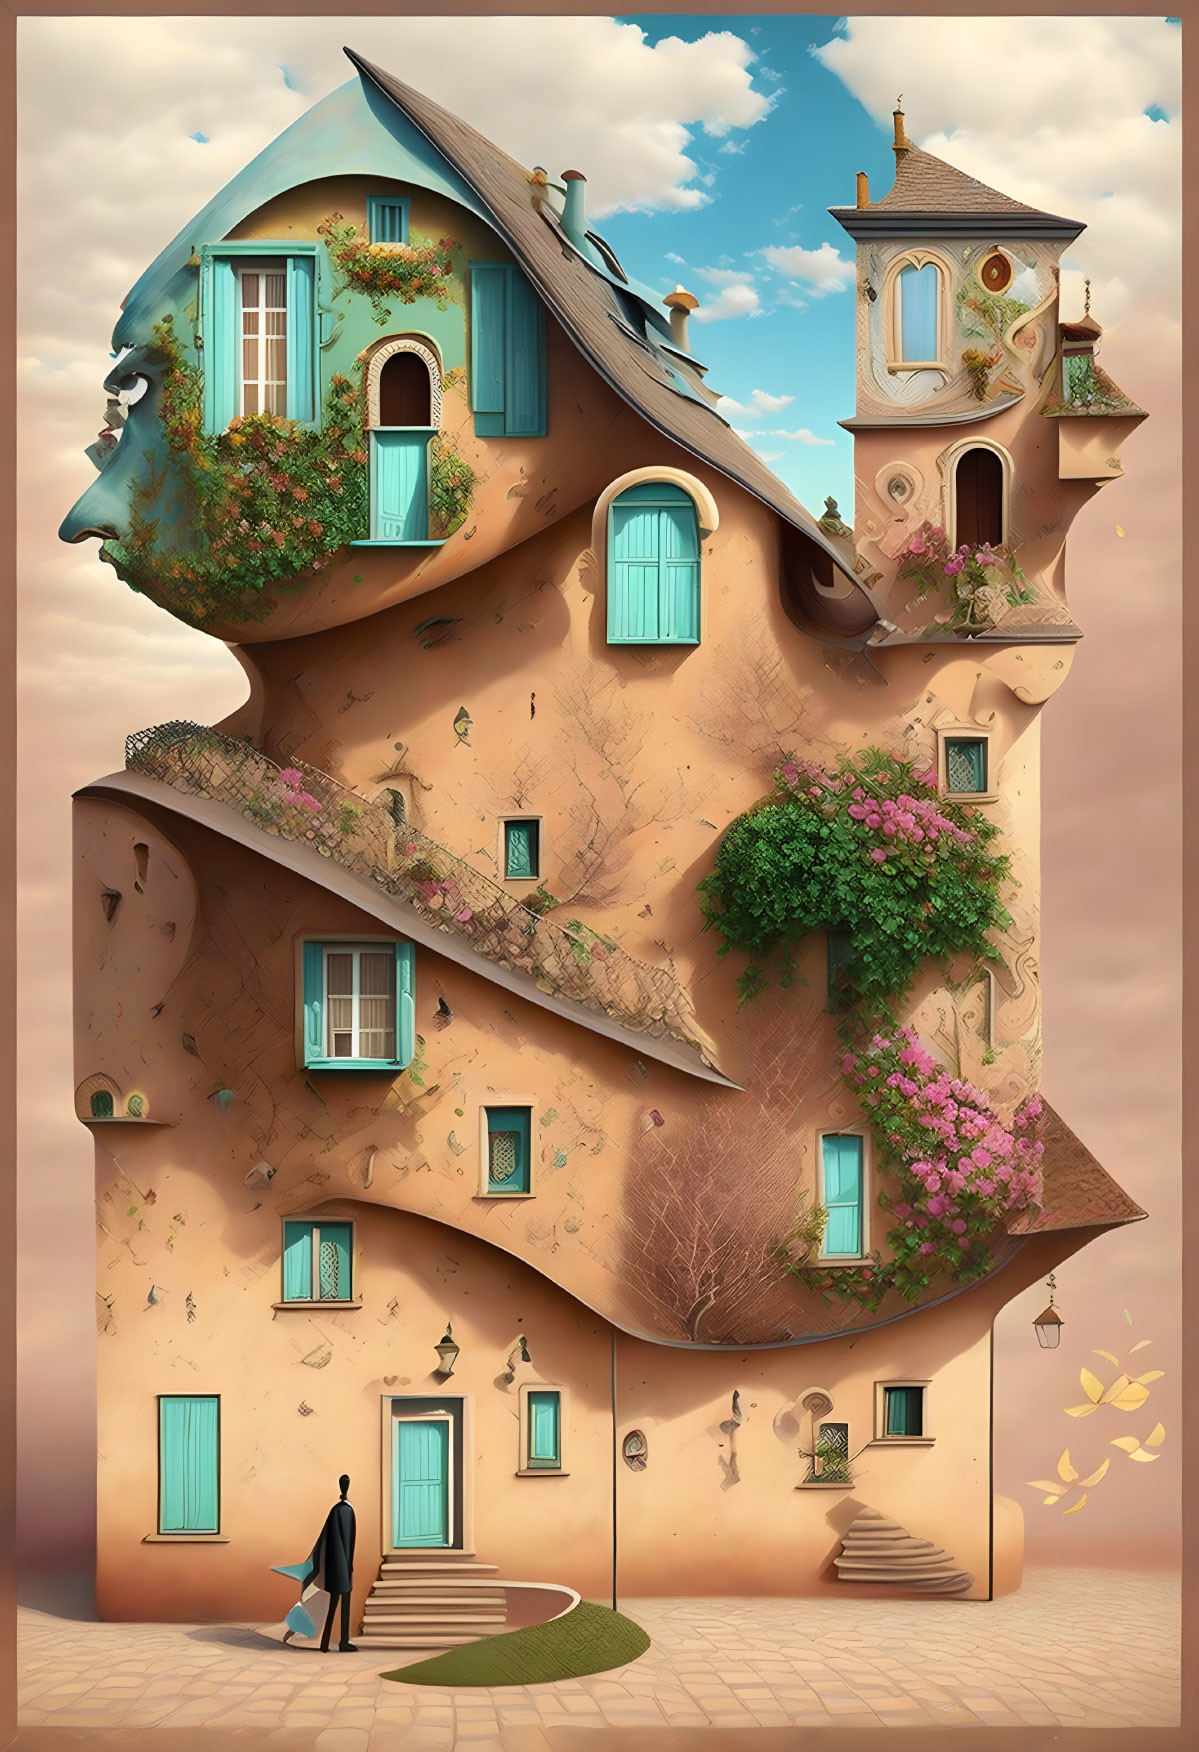 Surreal illustration of a tall house with diverse windows and doors